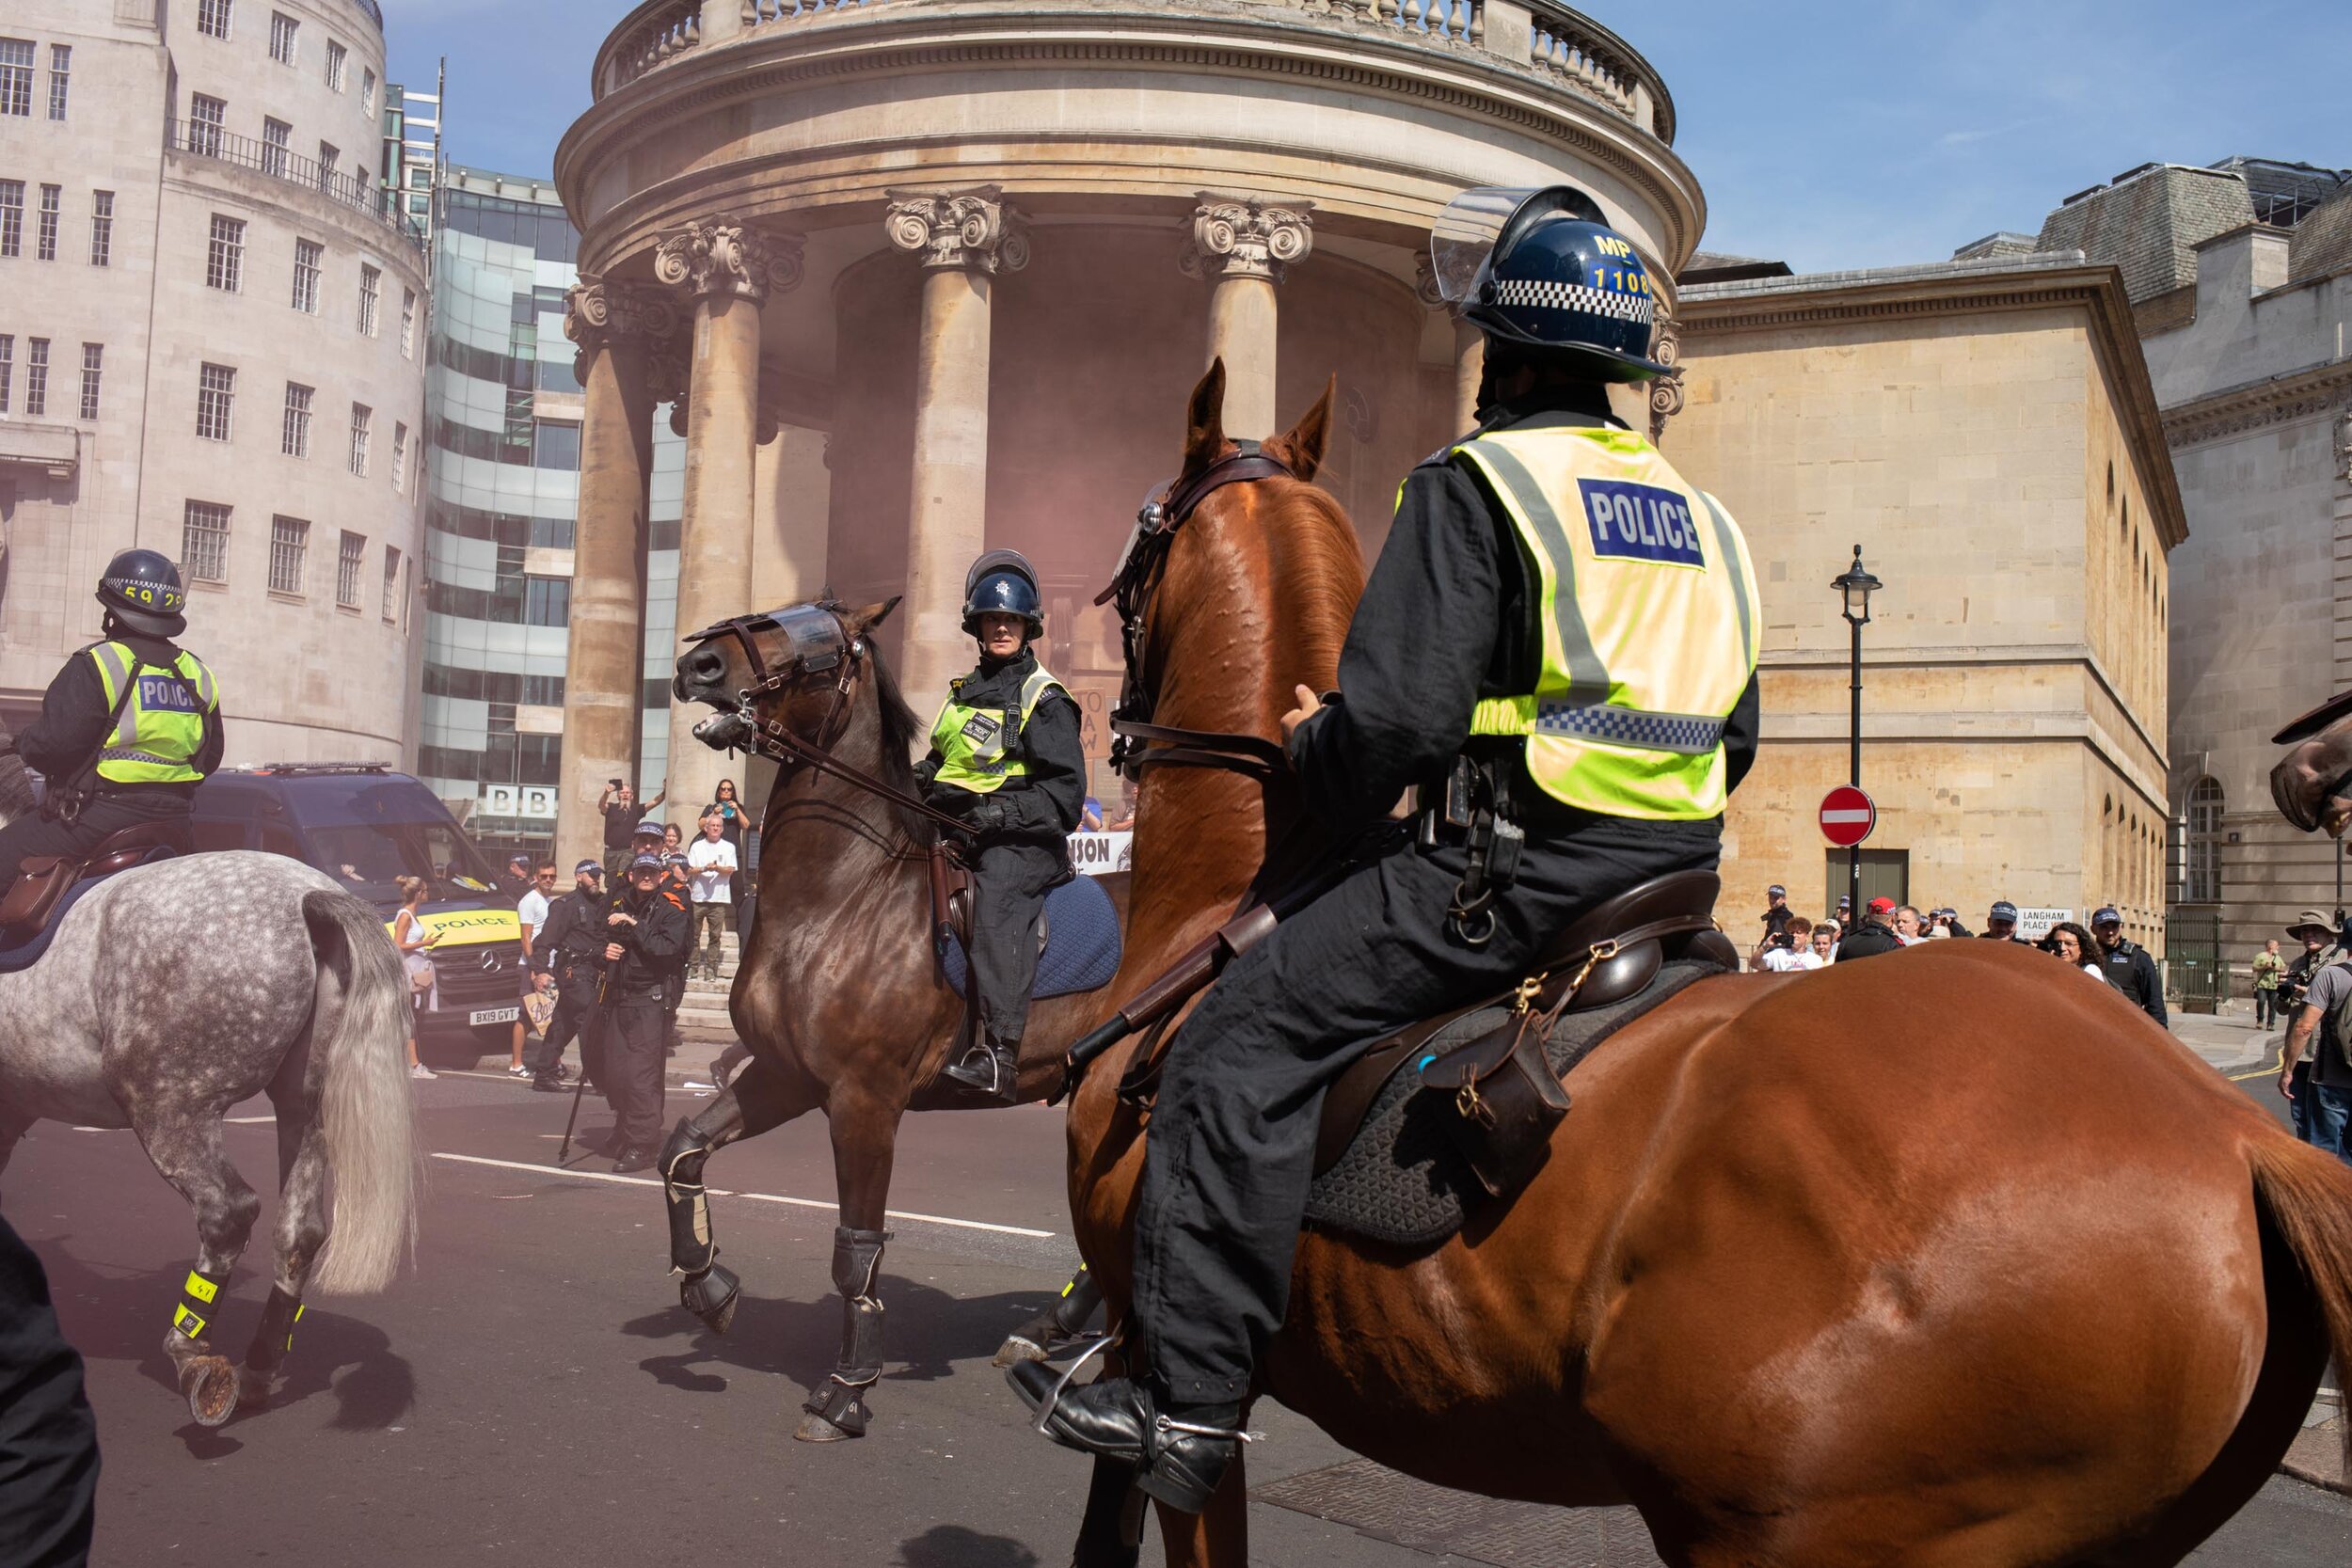  Mounted police arrive to separate Free Tommy Robinson demonstrators and anti-fascist groups including Stand up to Racism. 